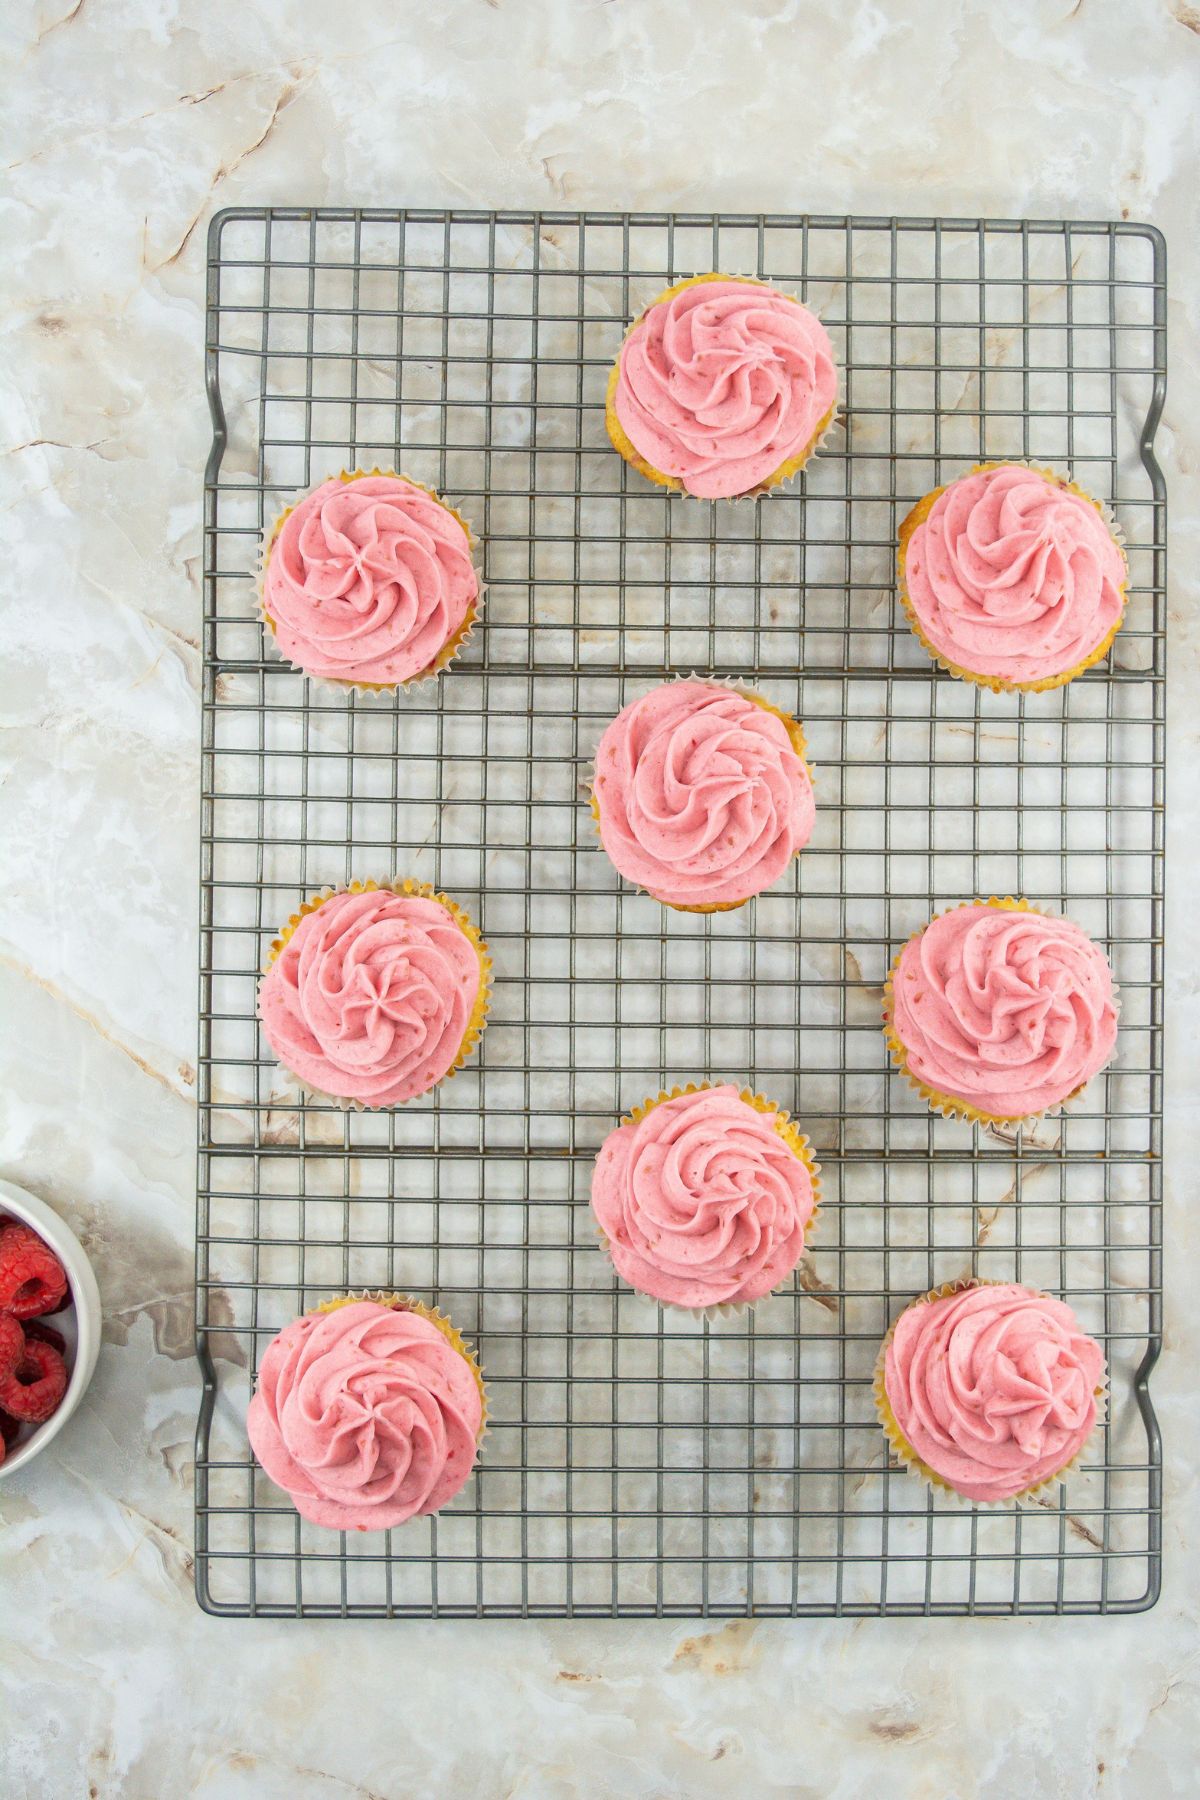 Raspberry cupcakes on a cooling rack.